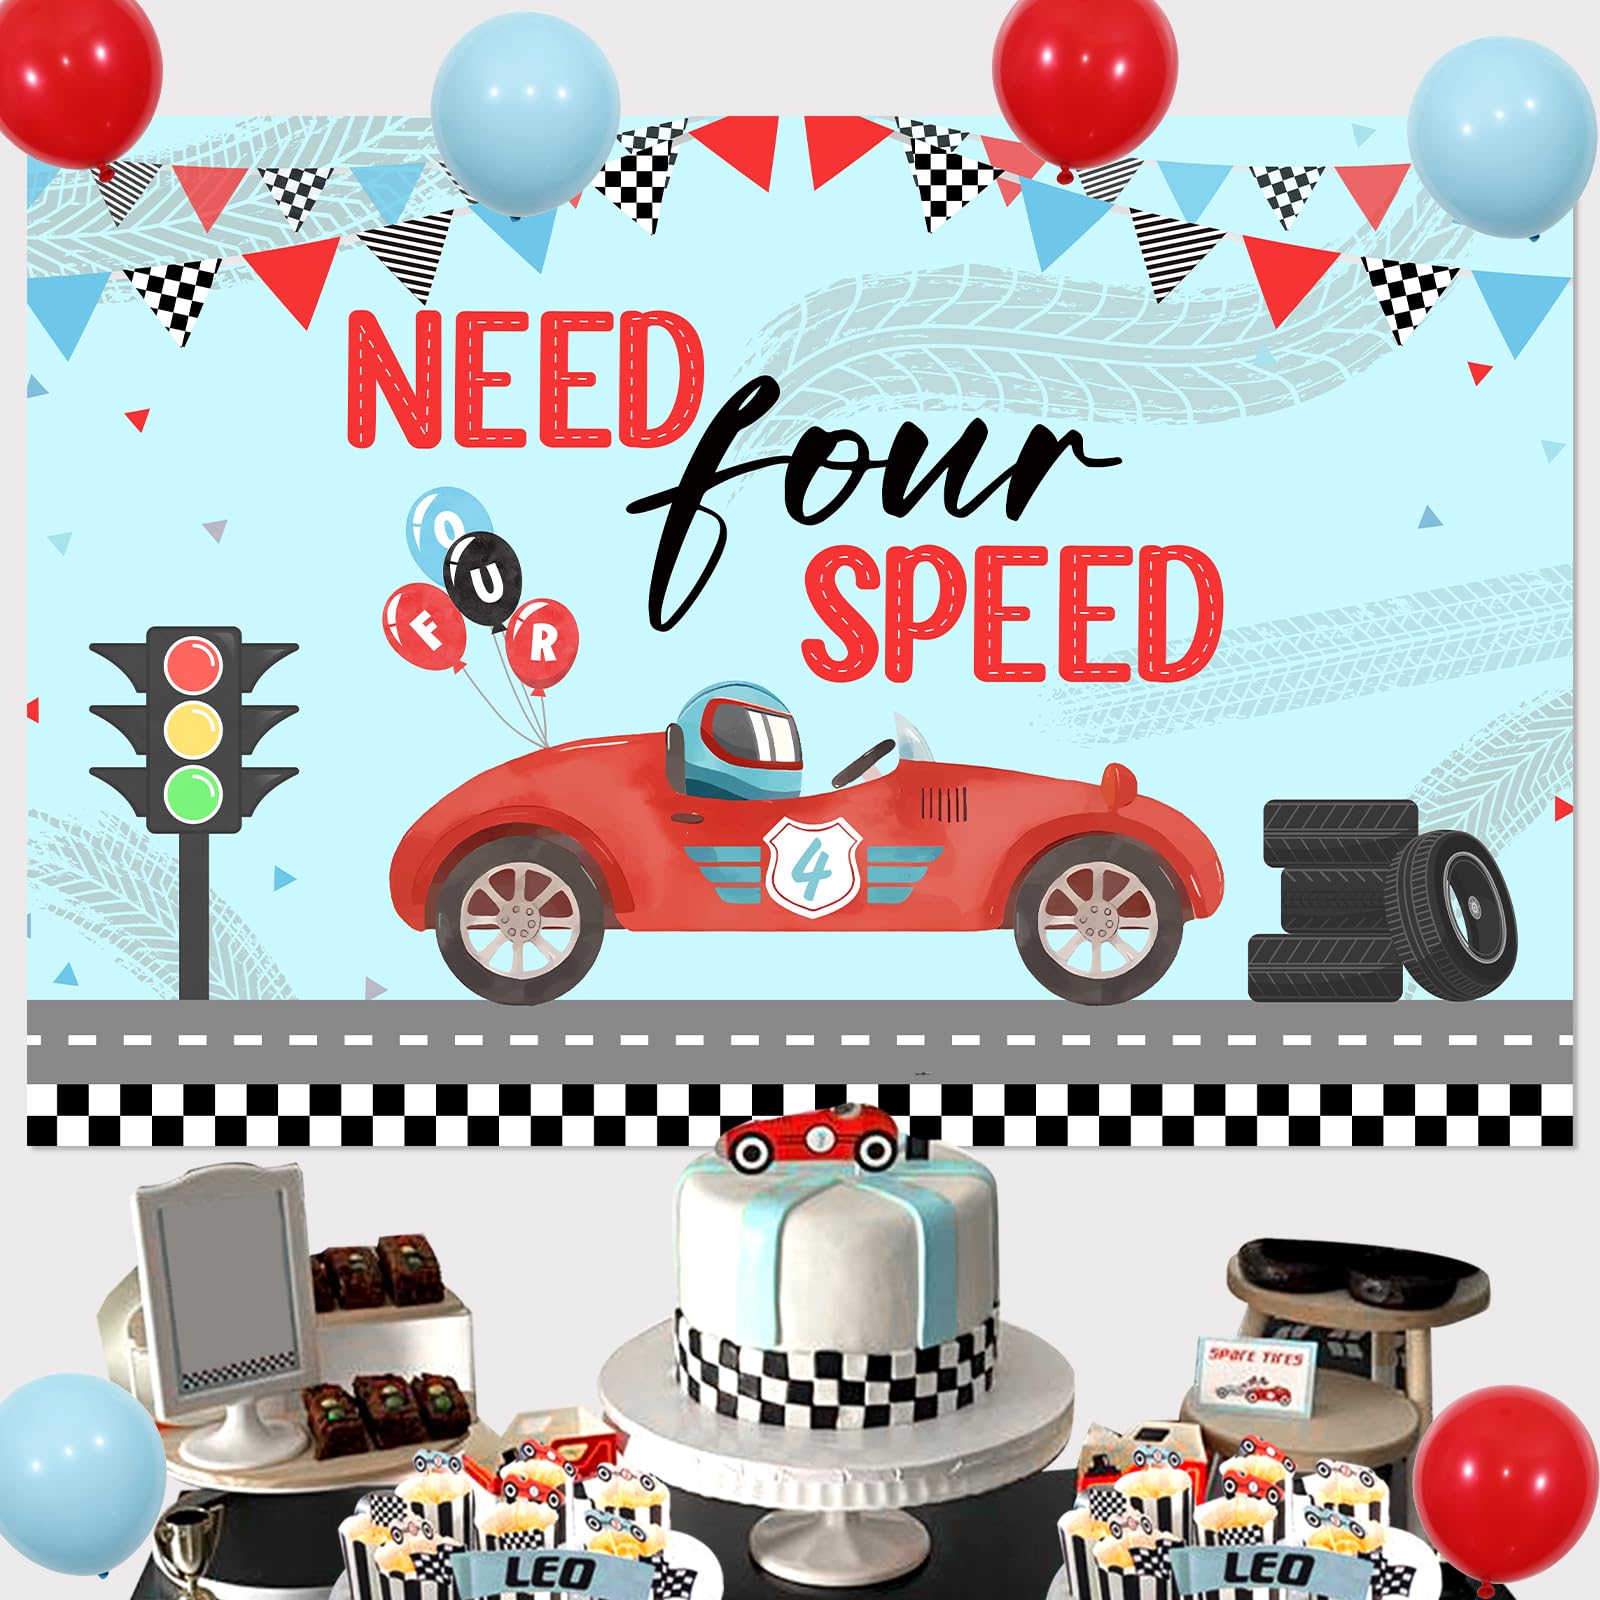 Wonmelody Race Car 4th Birthday Party Backdrop Need Four Speed Backdrop Banner Race Car 4th Birthday Decorations Red Blue Race Car Vintage Photography Background Photo Banner Supplies for 4th Boys